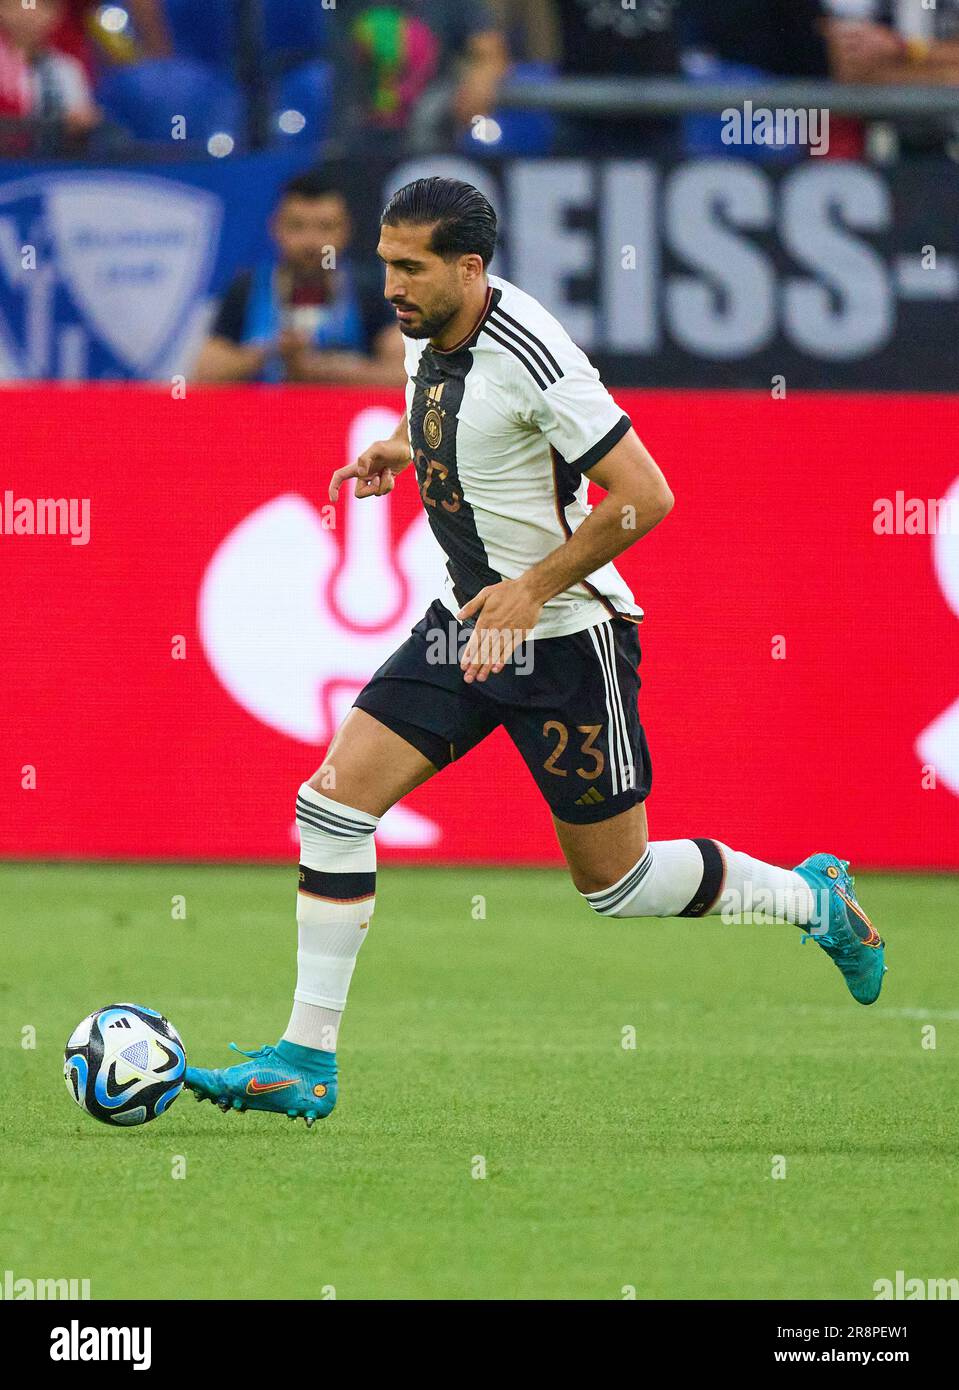 Emre Can, DFB 23   in the friendly match GERMANY - COLUMBIA 0-2 DEUTSCHLAND - KOLUMBIEN 0-2 Preparation for European Championships 2024 in Germany ,Season 2023/2024, on June 20, 2023  in Gelsenkirchen, Germany.  © Peter Schatz / Alamy Live News Stock Photo